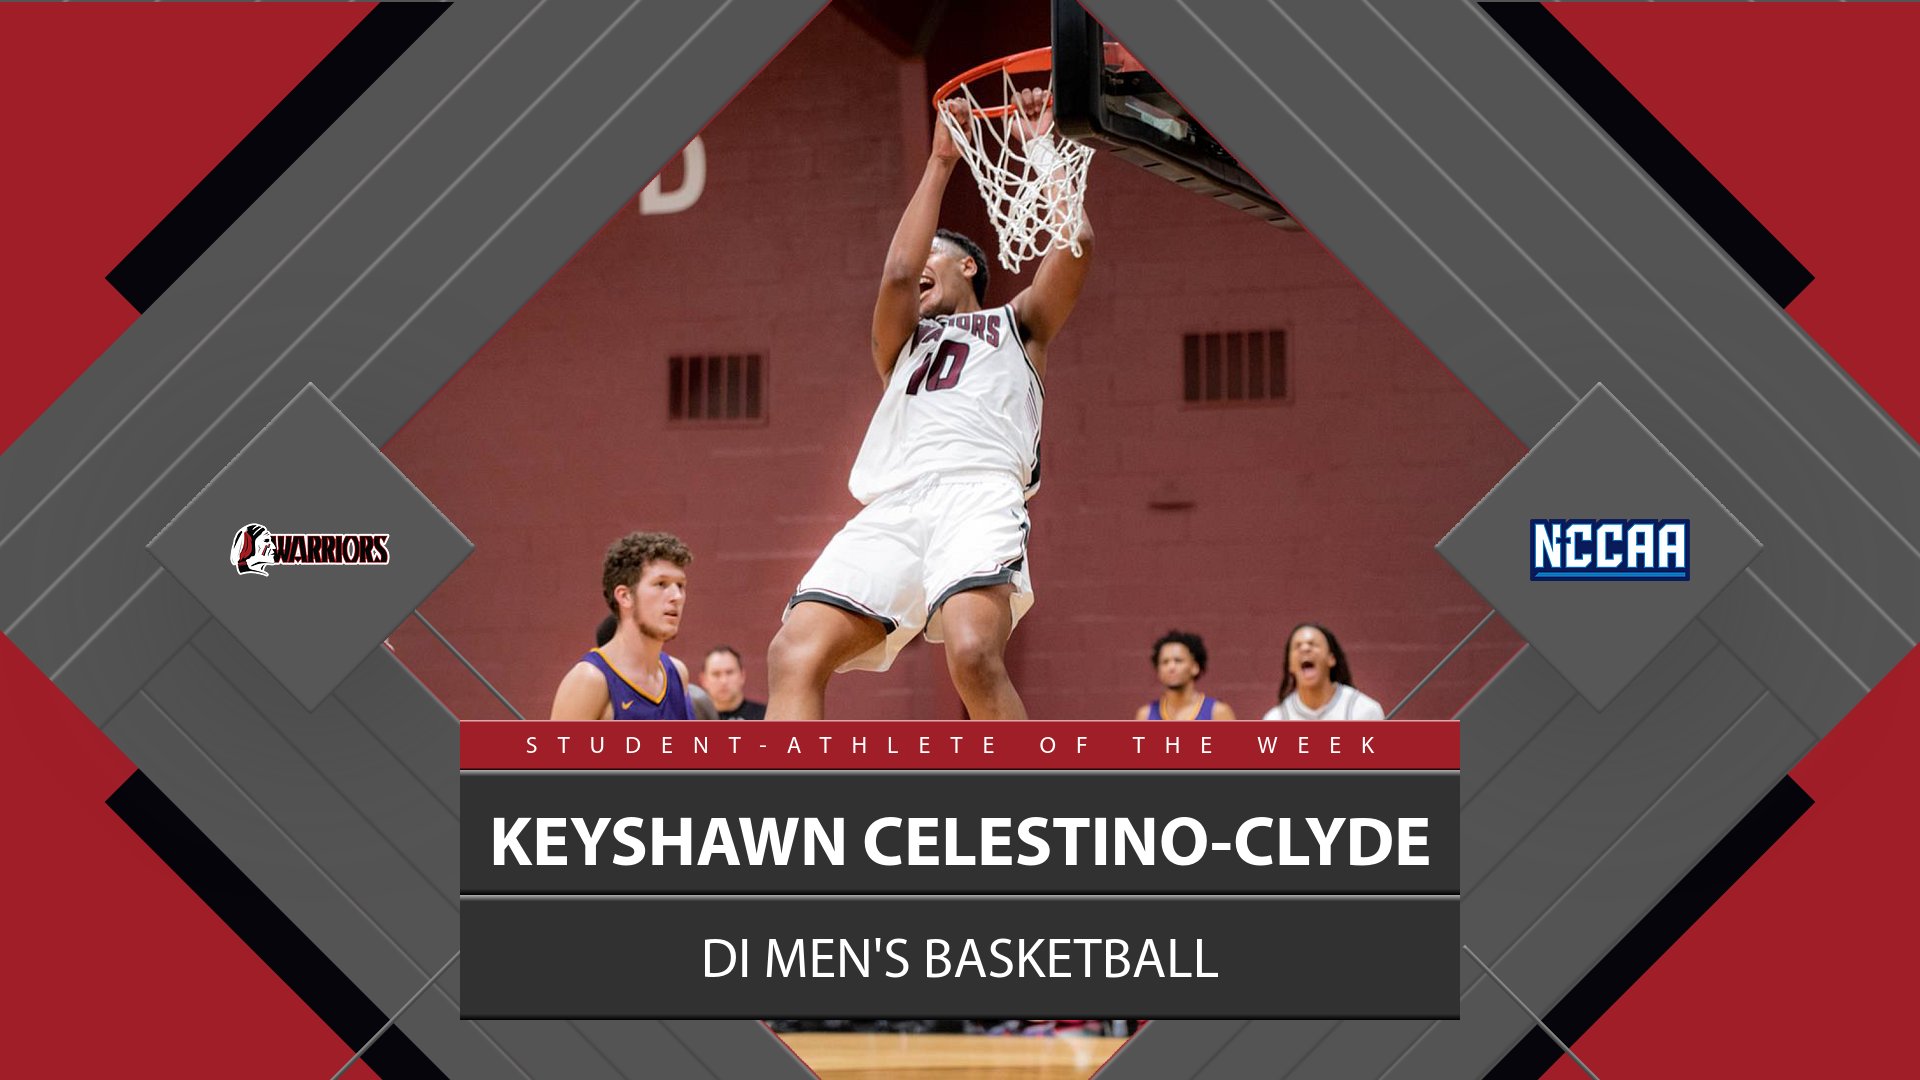 Keyshawn Celestino-Clyde named National Player of The Week